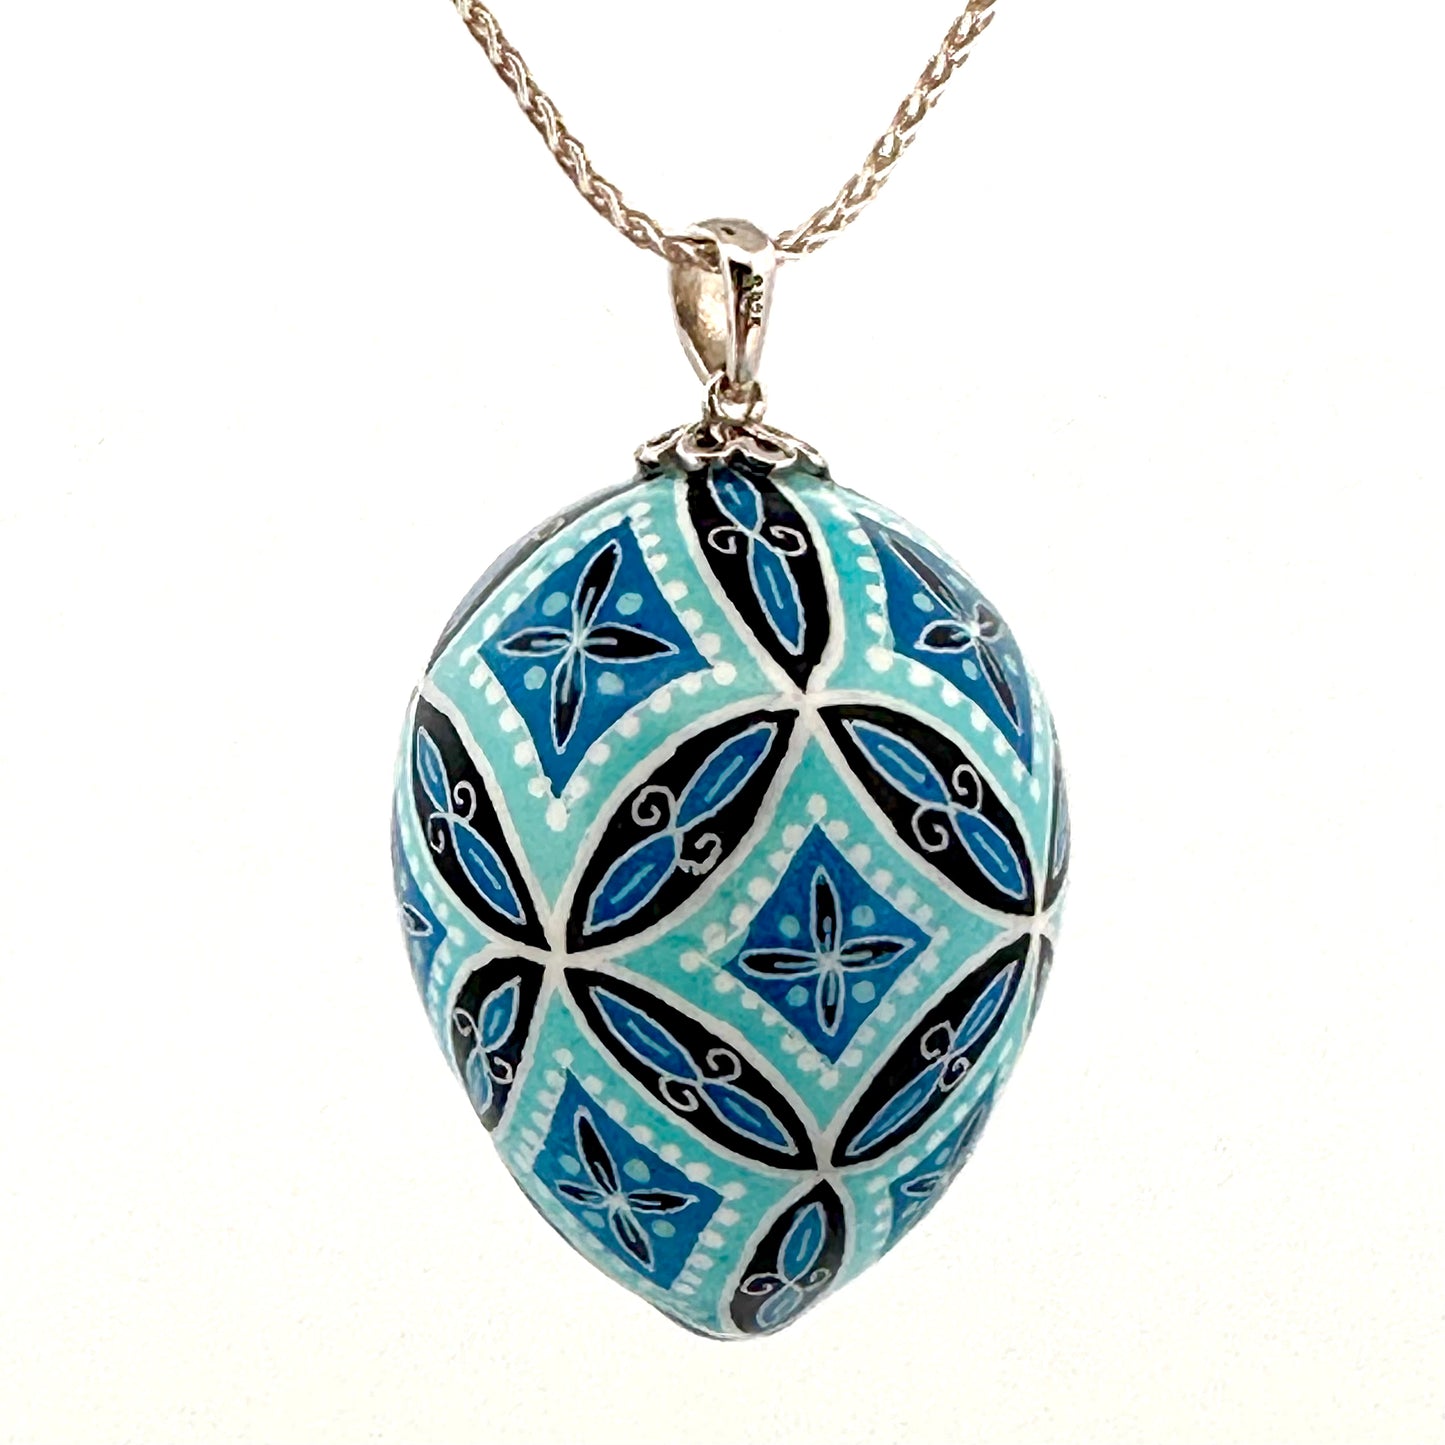 Filled whole quail Pysanky necklace